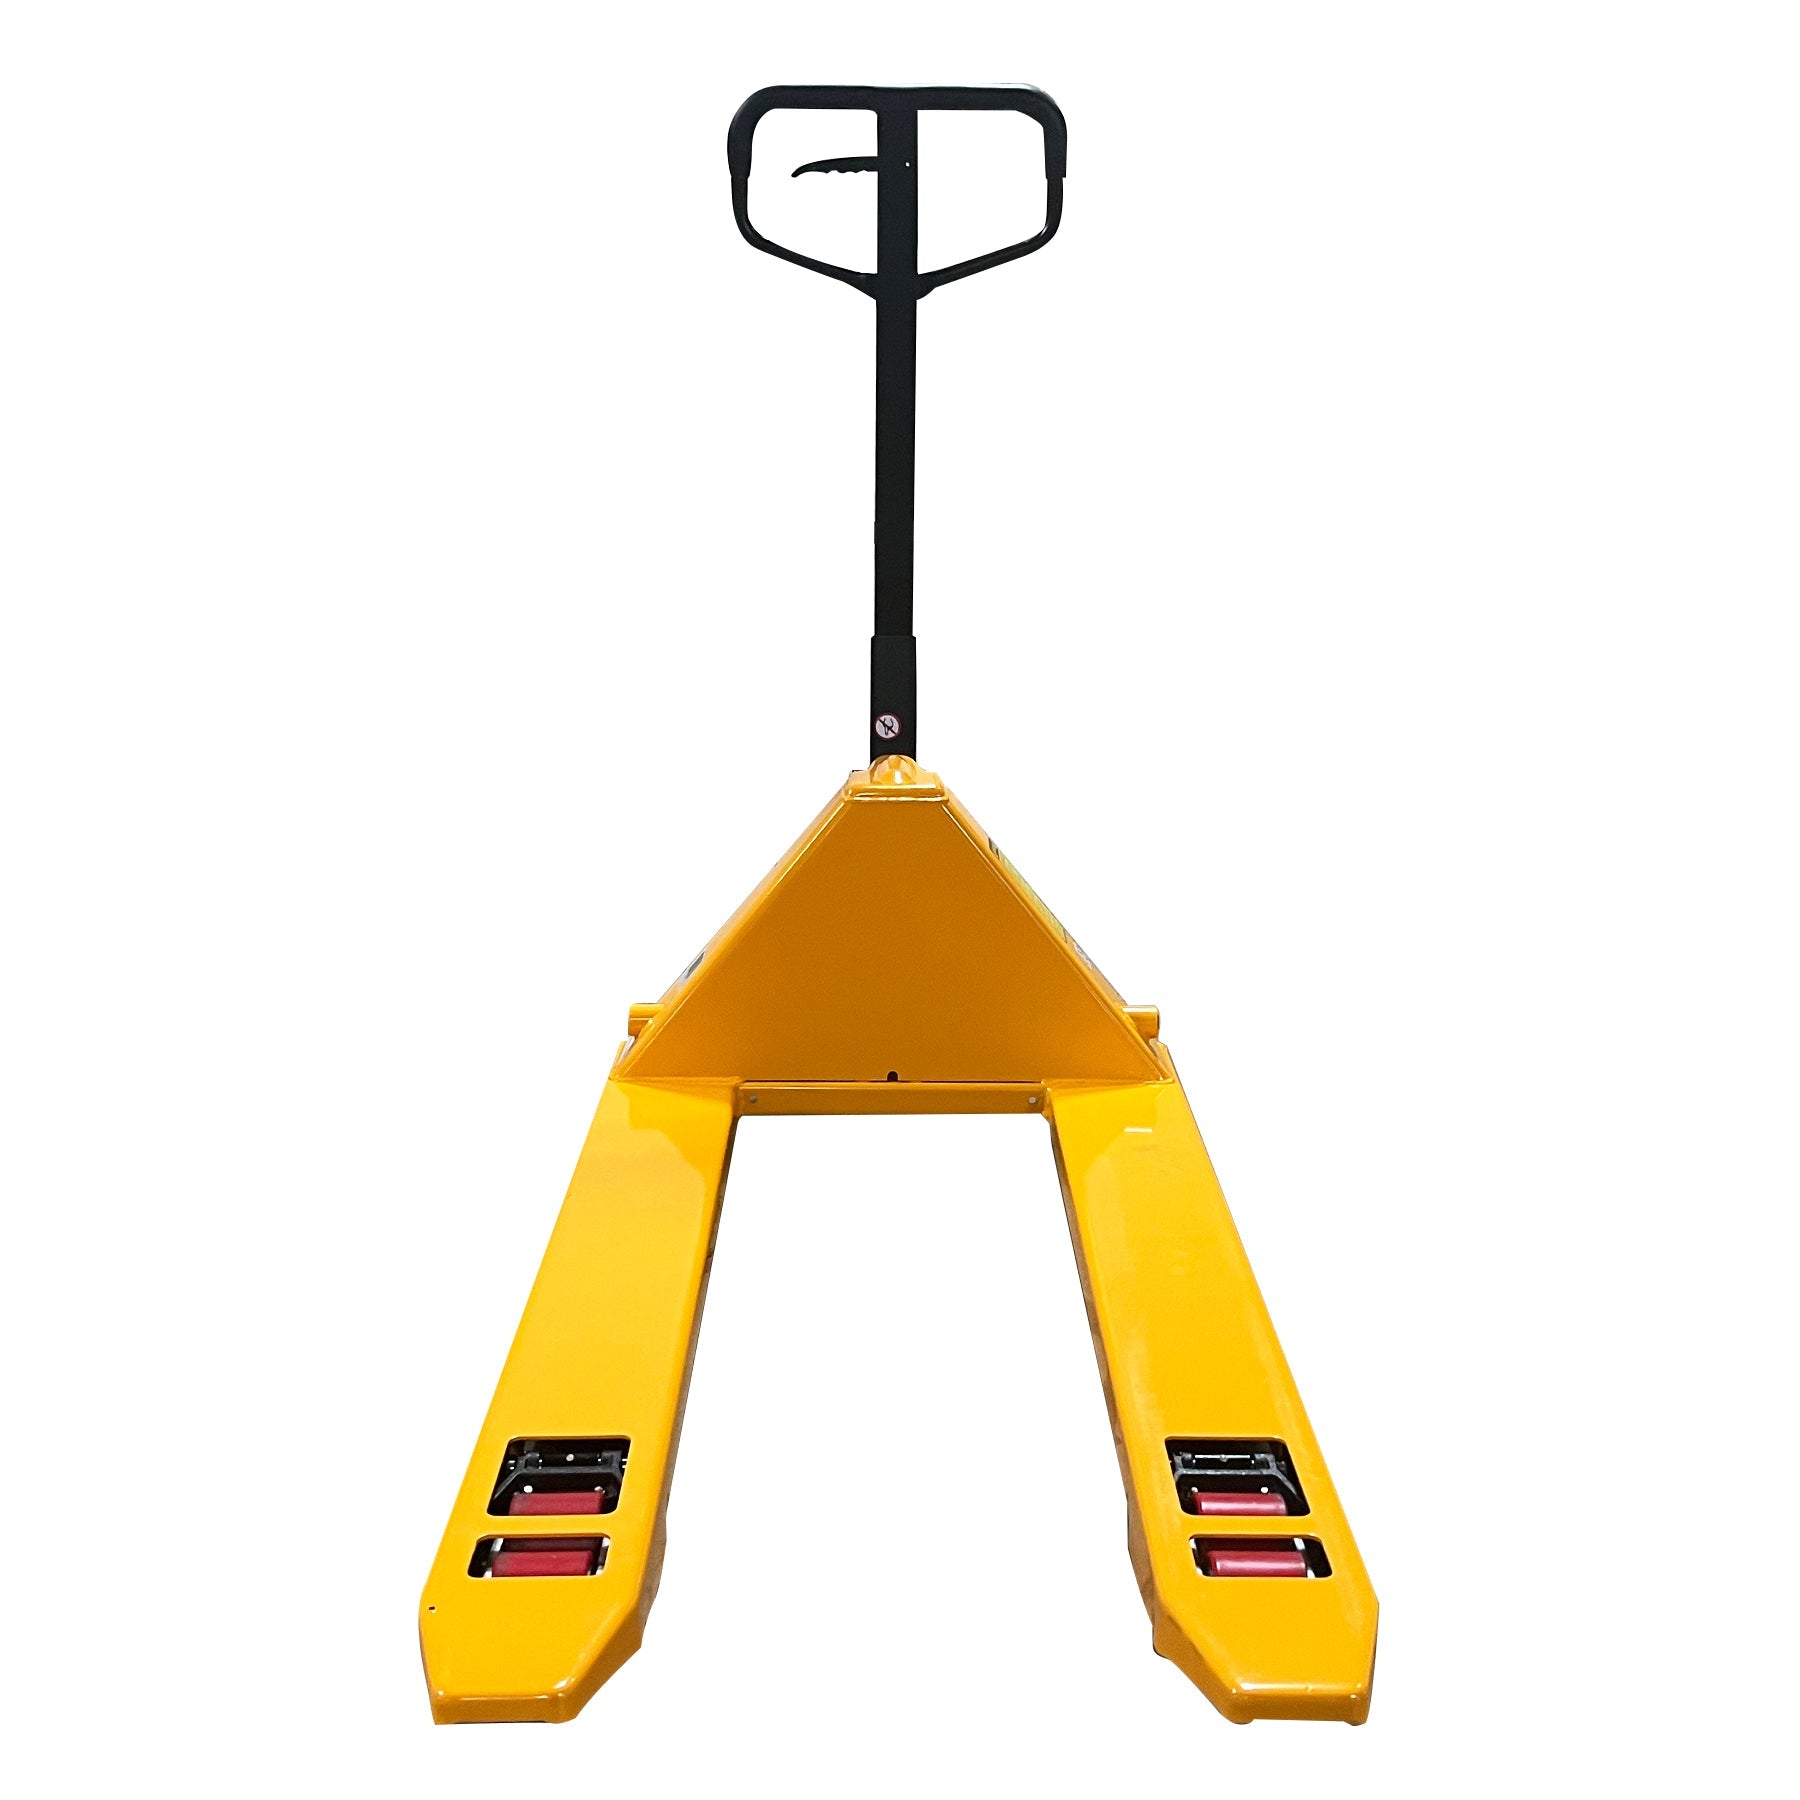 ApolloLift | Heavy Duty Manual Hand Pallet Jack for Material Handling 7700 lbs 48" x27"Fork